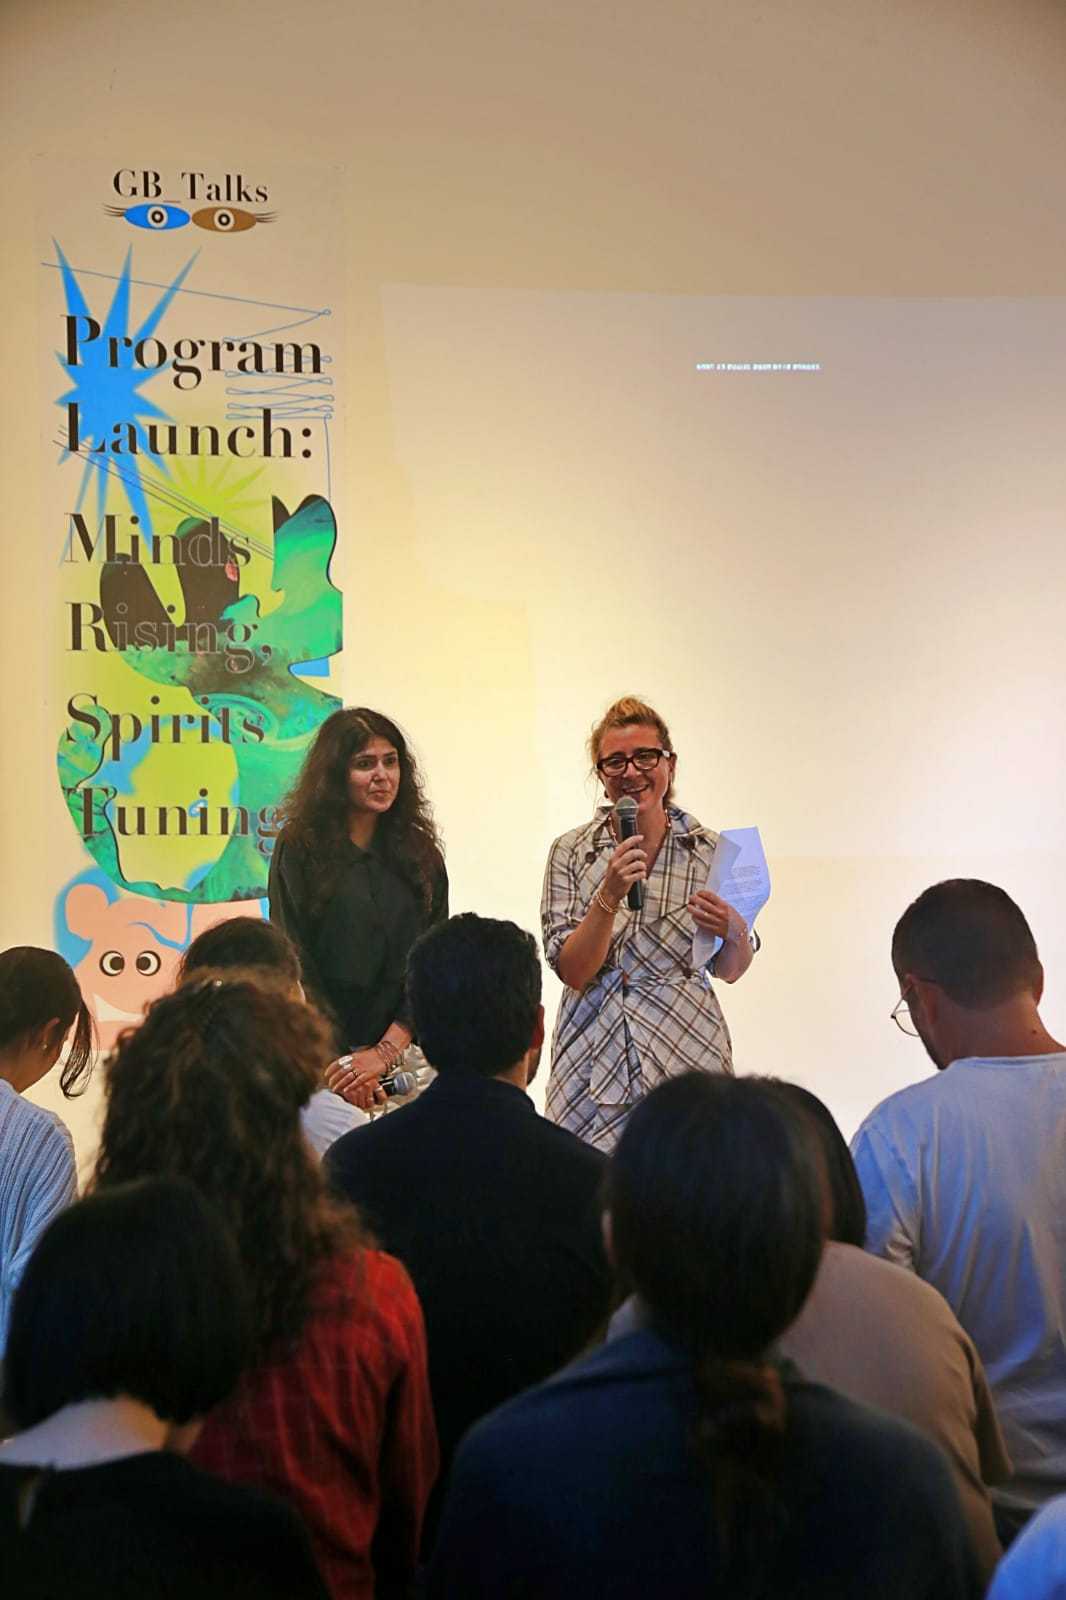 Defne Ayas (right) and Natasha Ginwala, co-directors of the 13th Gwangju Biennale speak during the event’s first official program, at an art studio in Gwangju on Tuesday. (Gwangju Biennale Foundation)